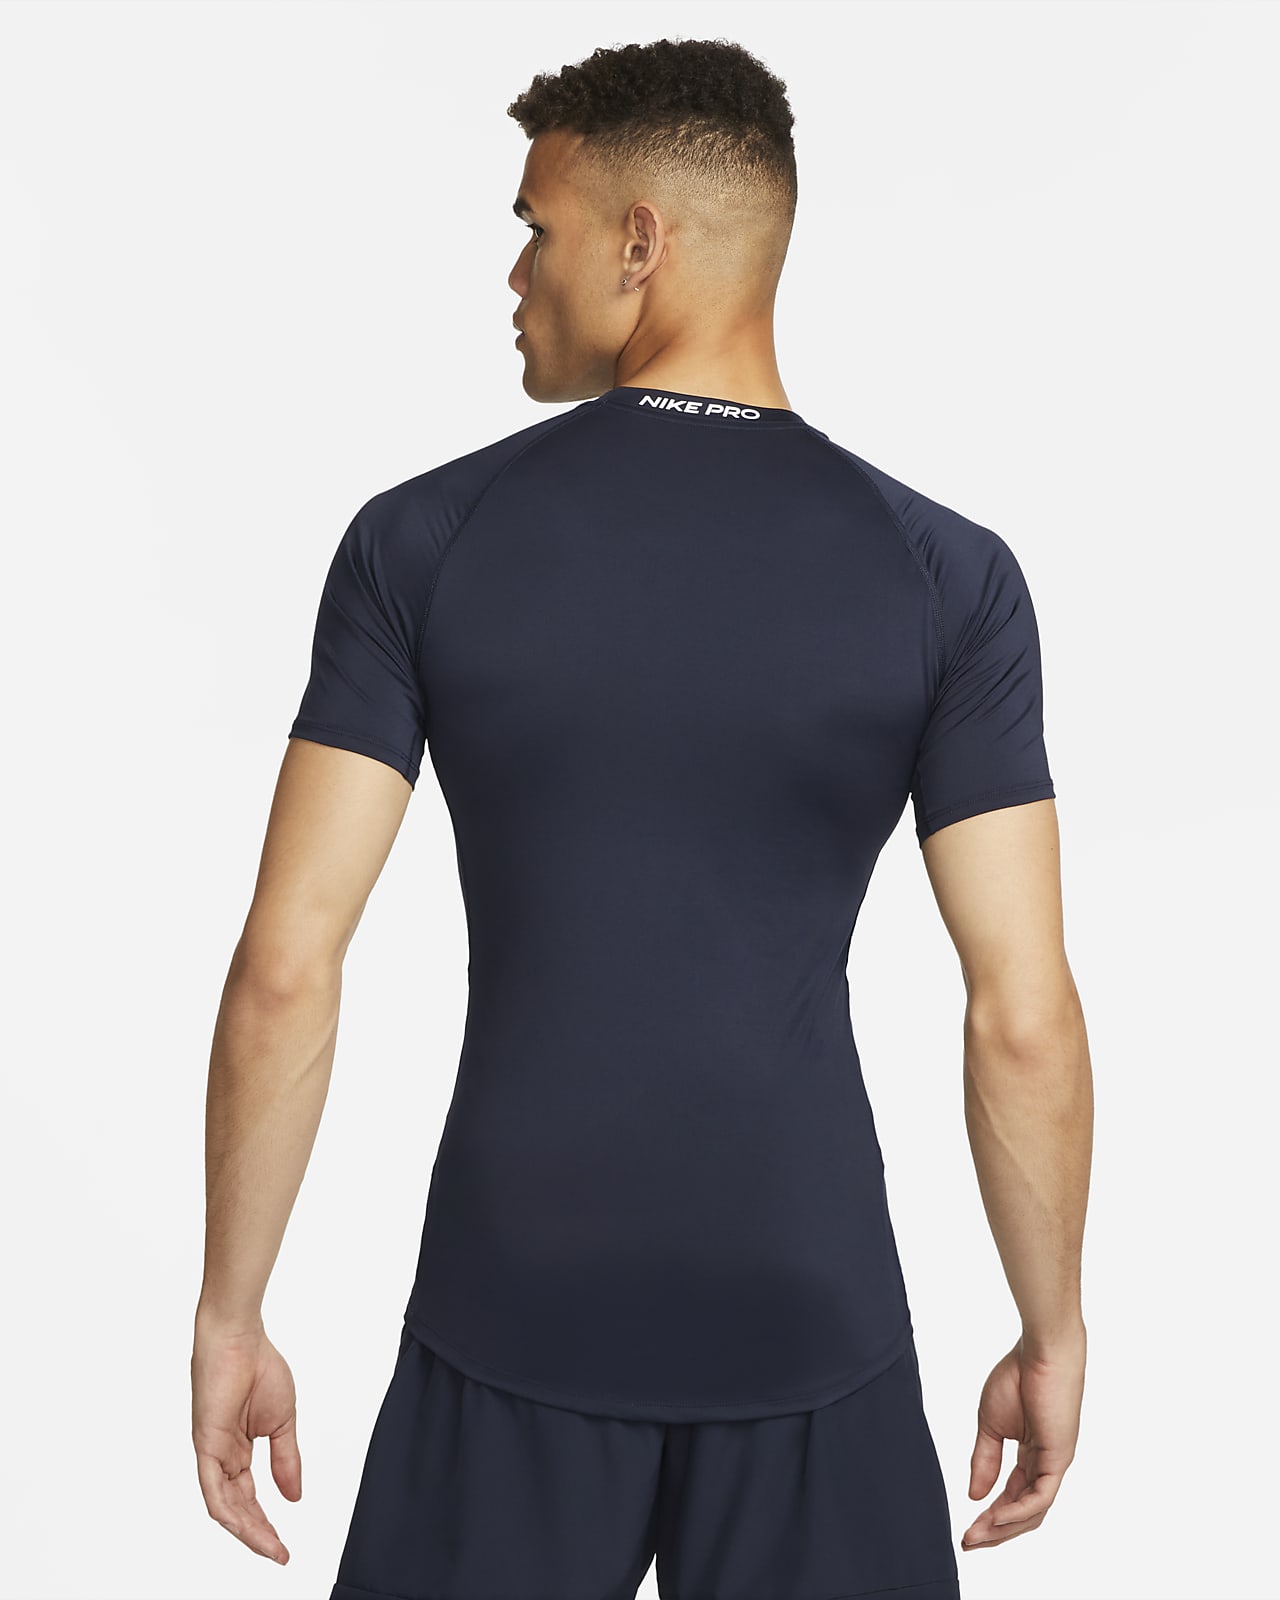 Find the best price on Nike Pro Compression Tank Top (Men's)